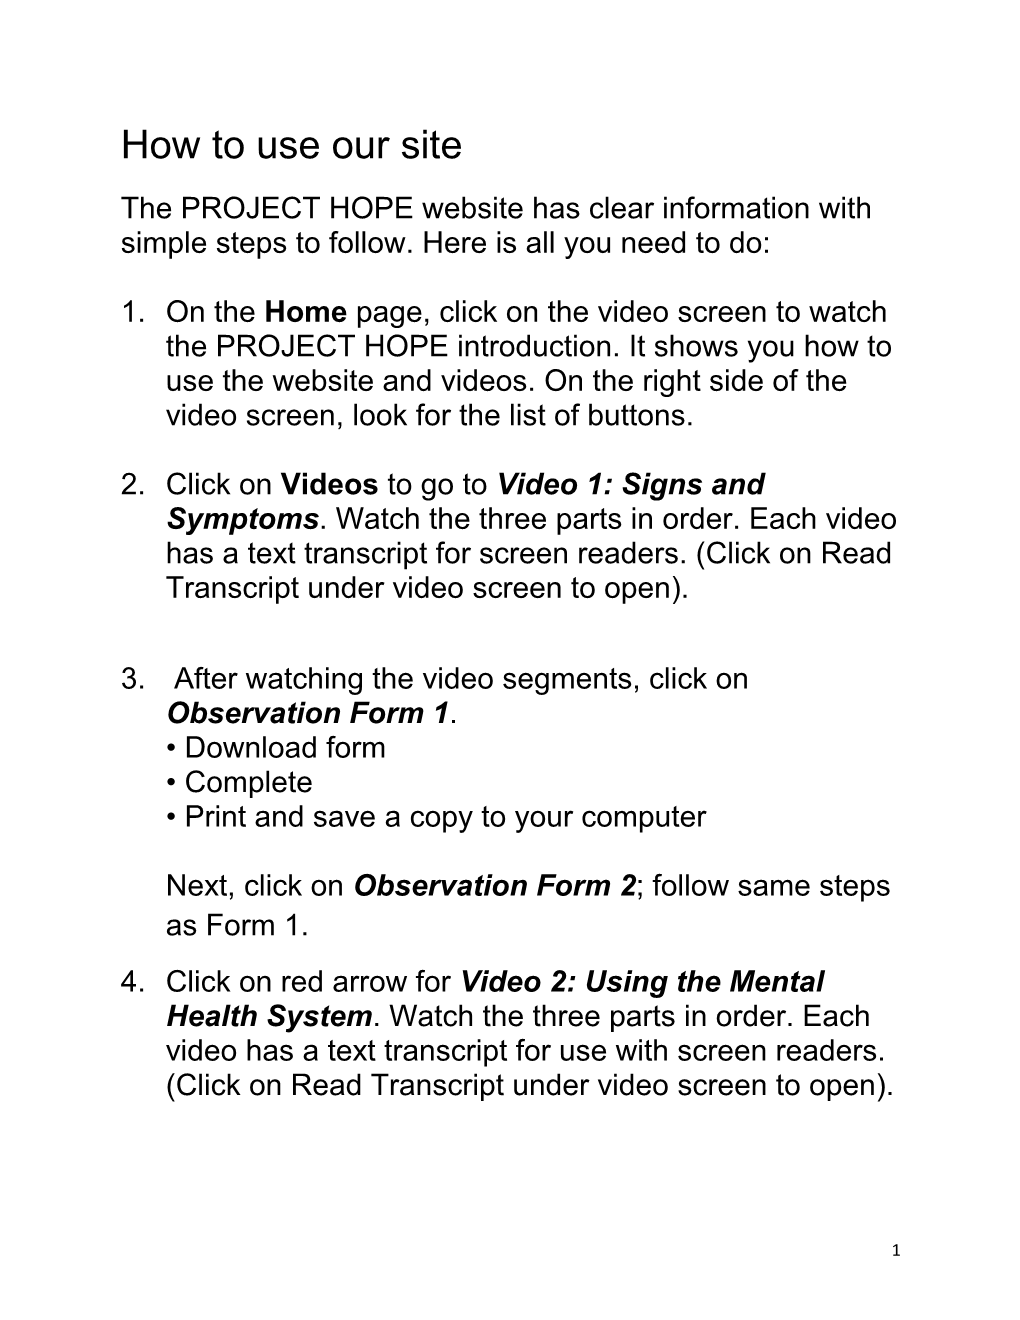 Project Hope How to Use Site